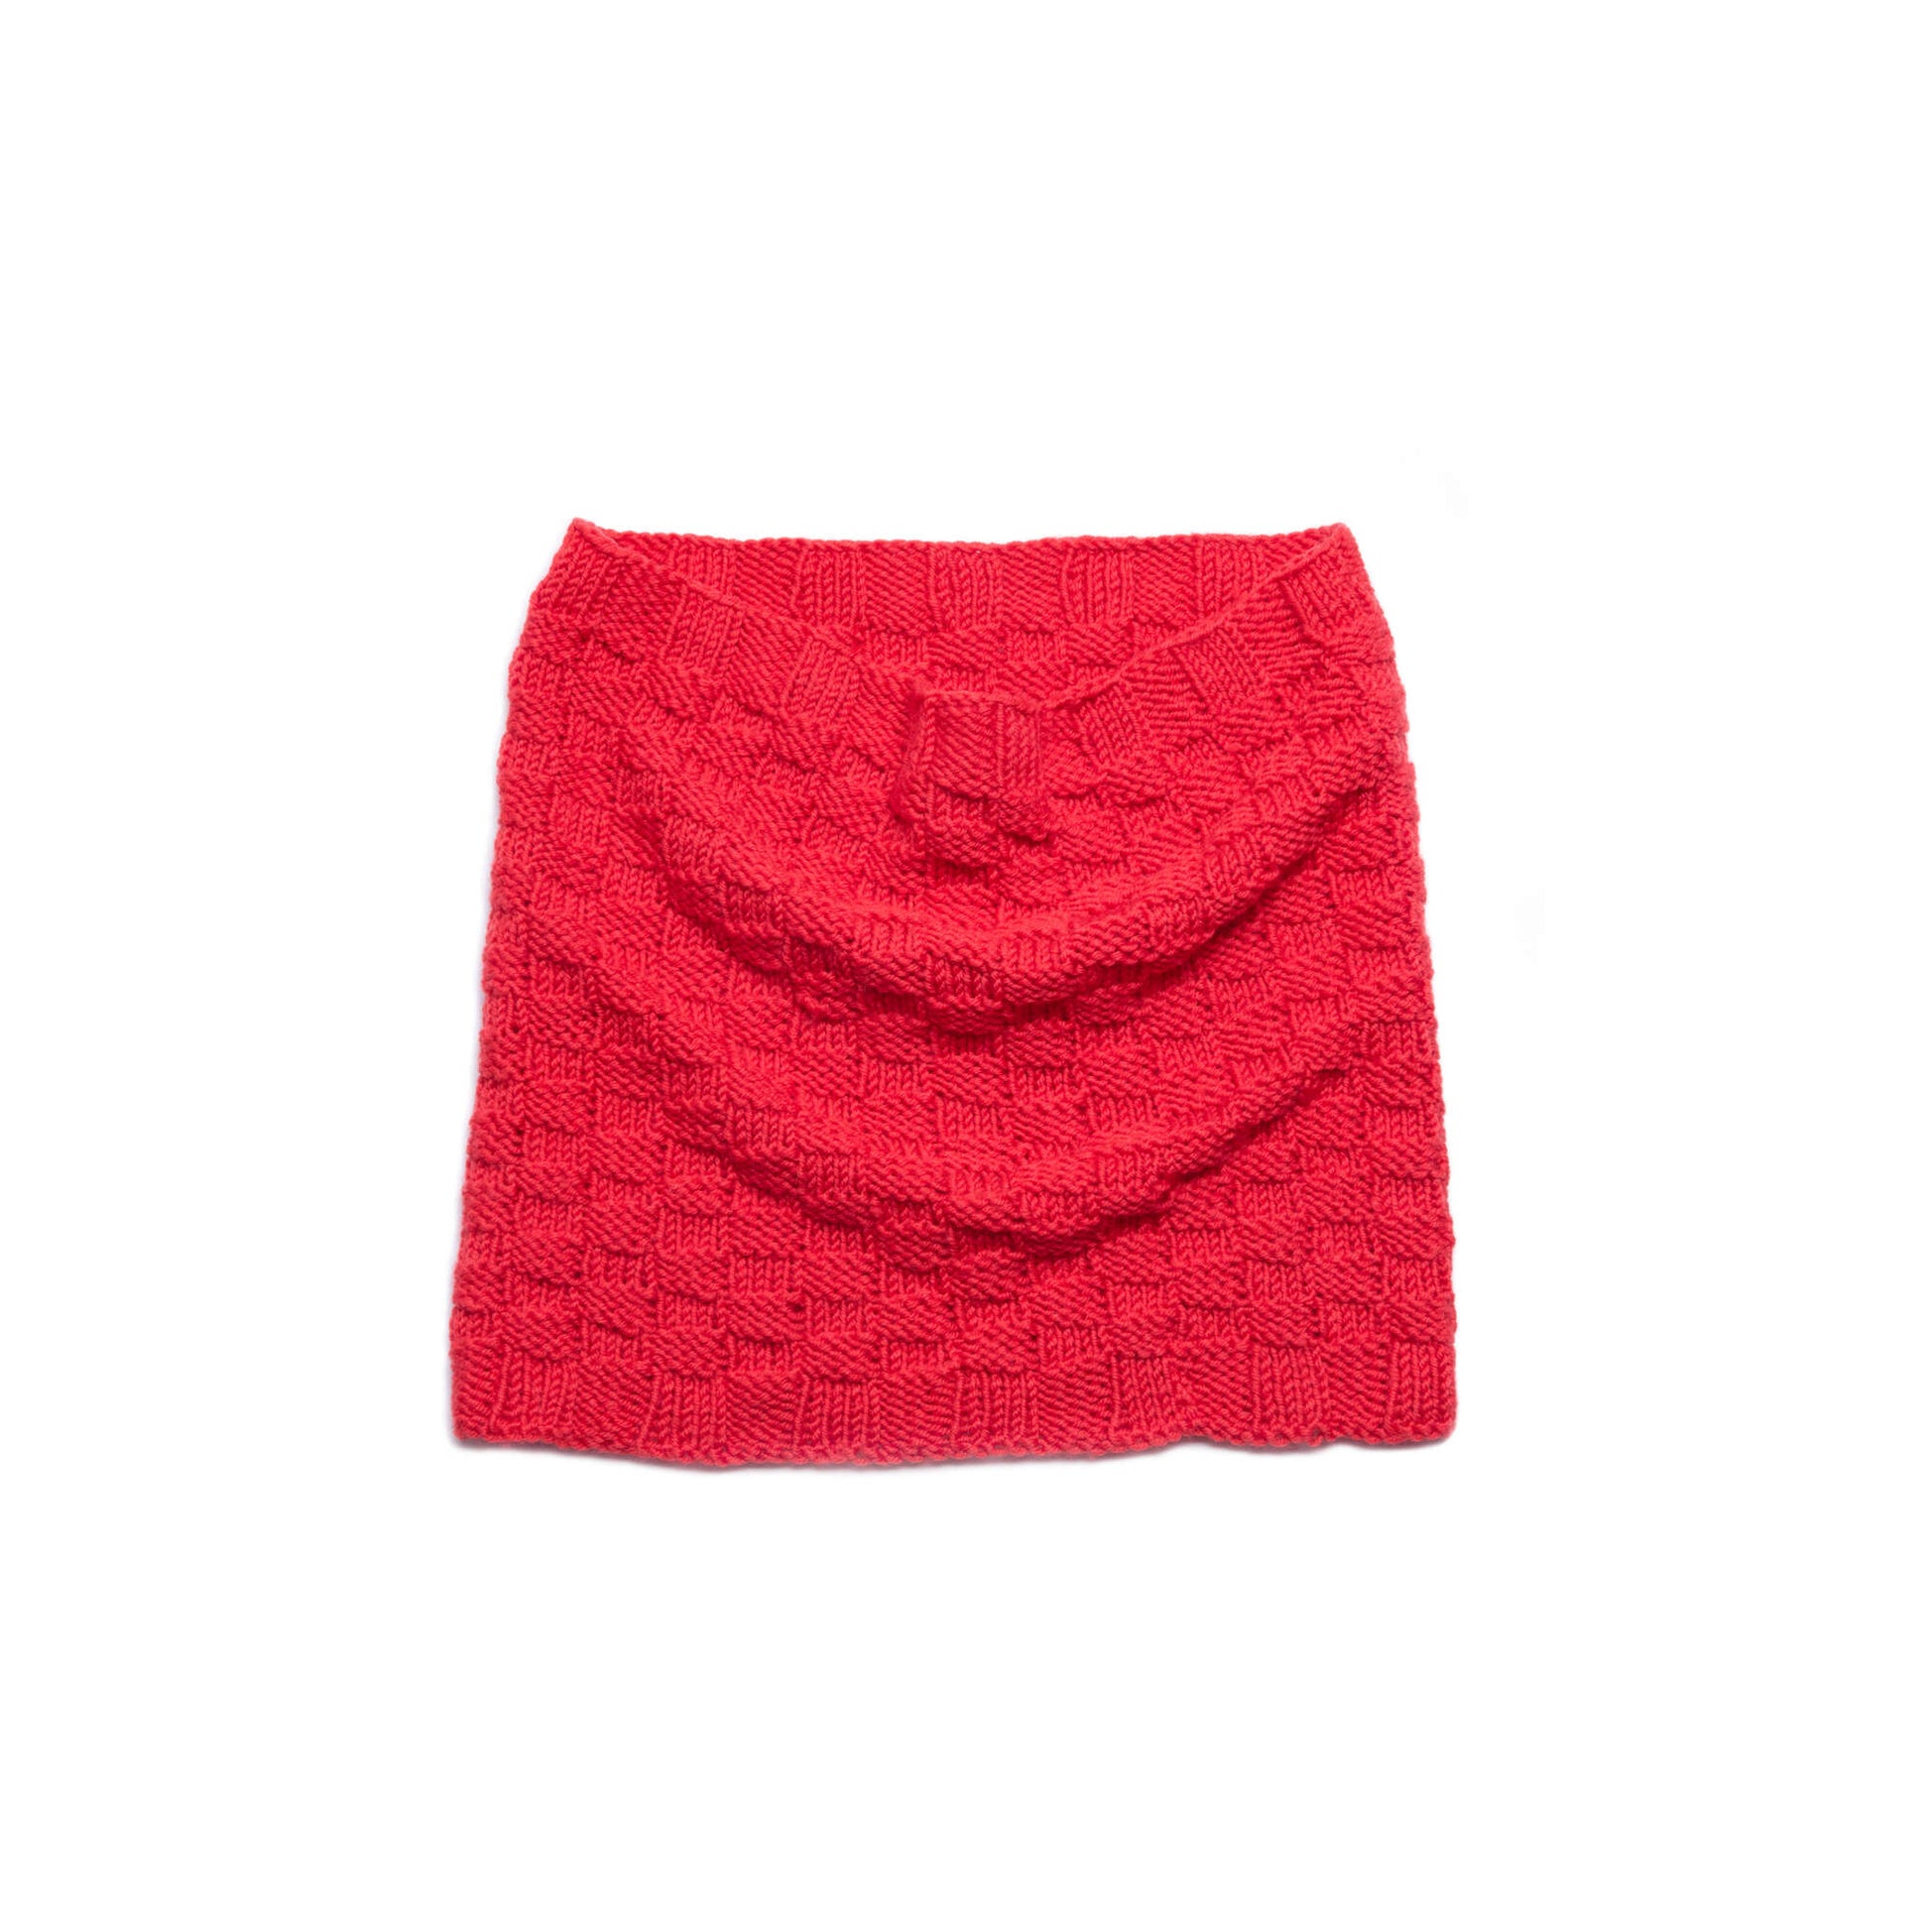 Free Red Heart Sunset Song Knit Cowl Pattern